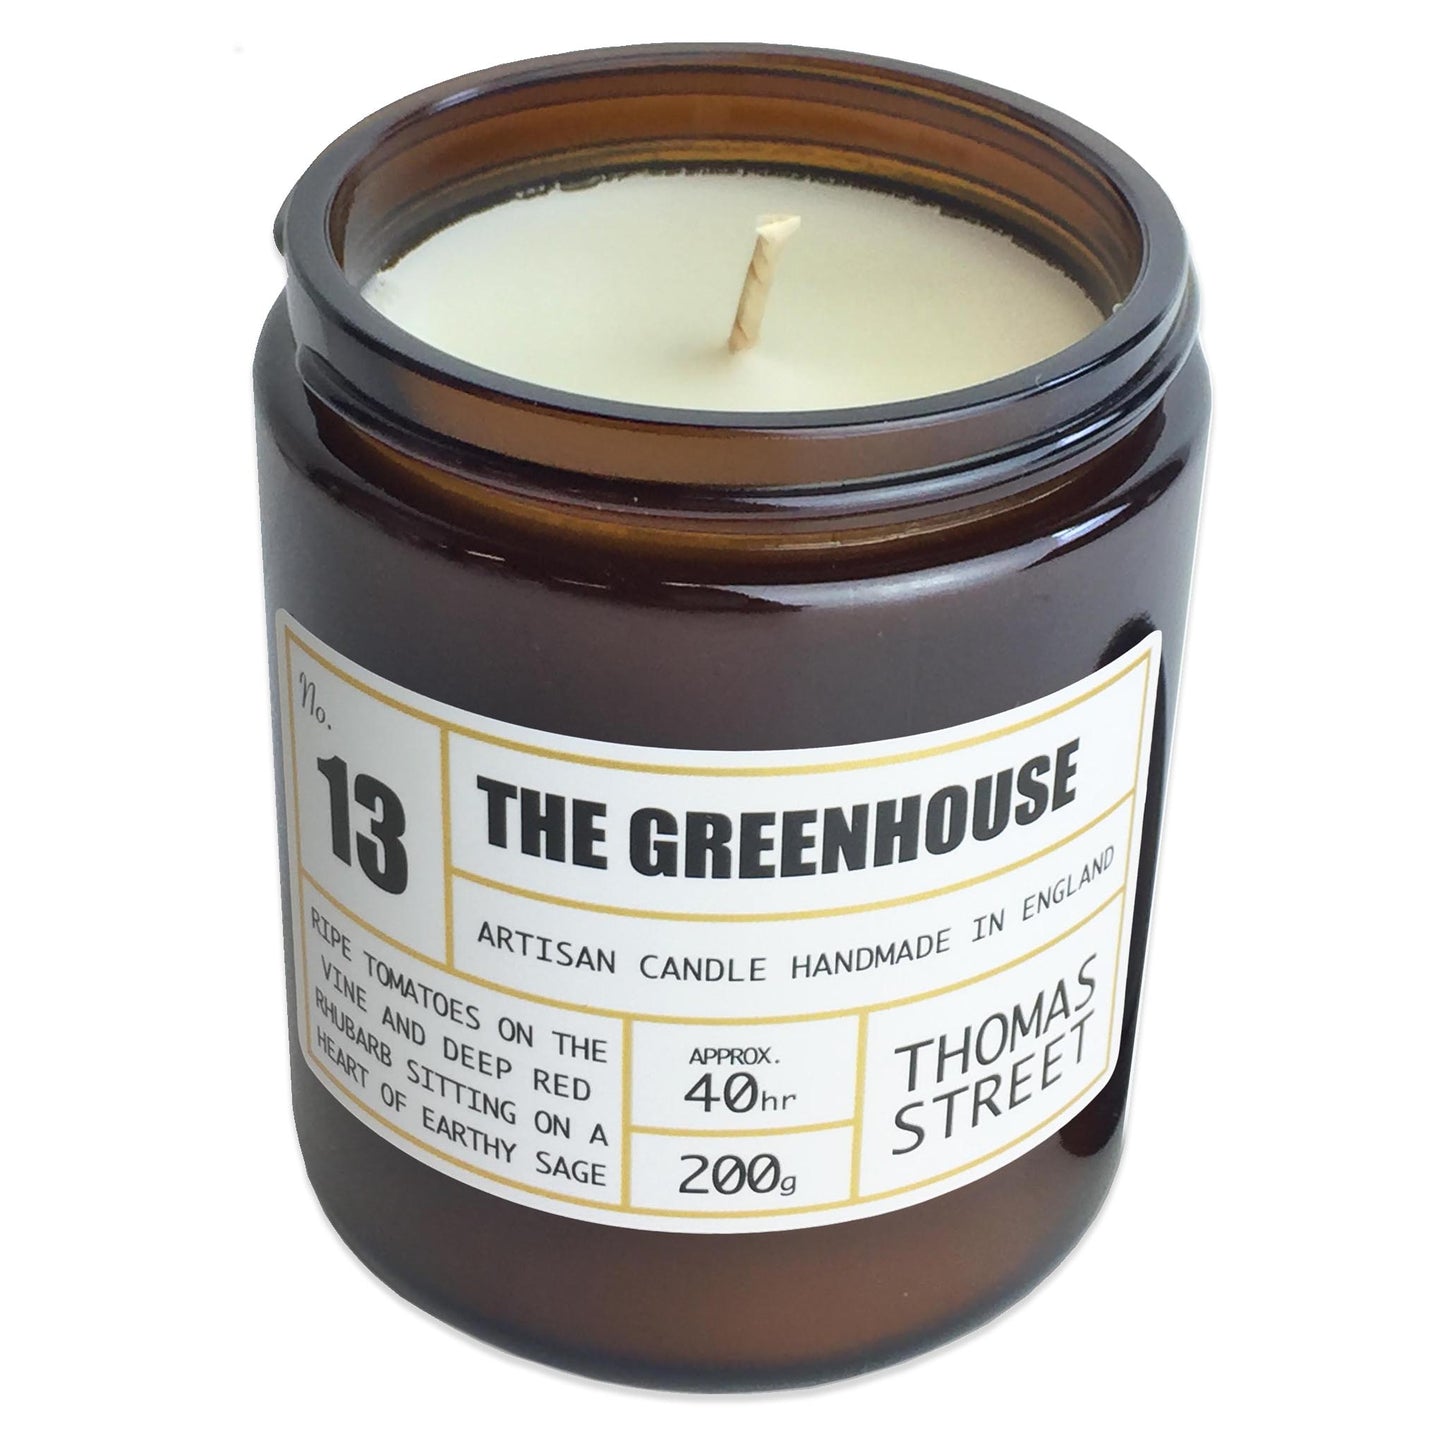 Thomas Street Apothecary Candle Jar 200g The Greenhouse